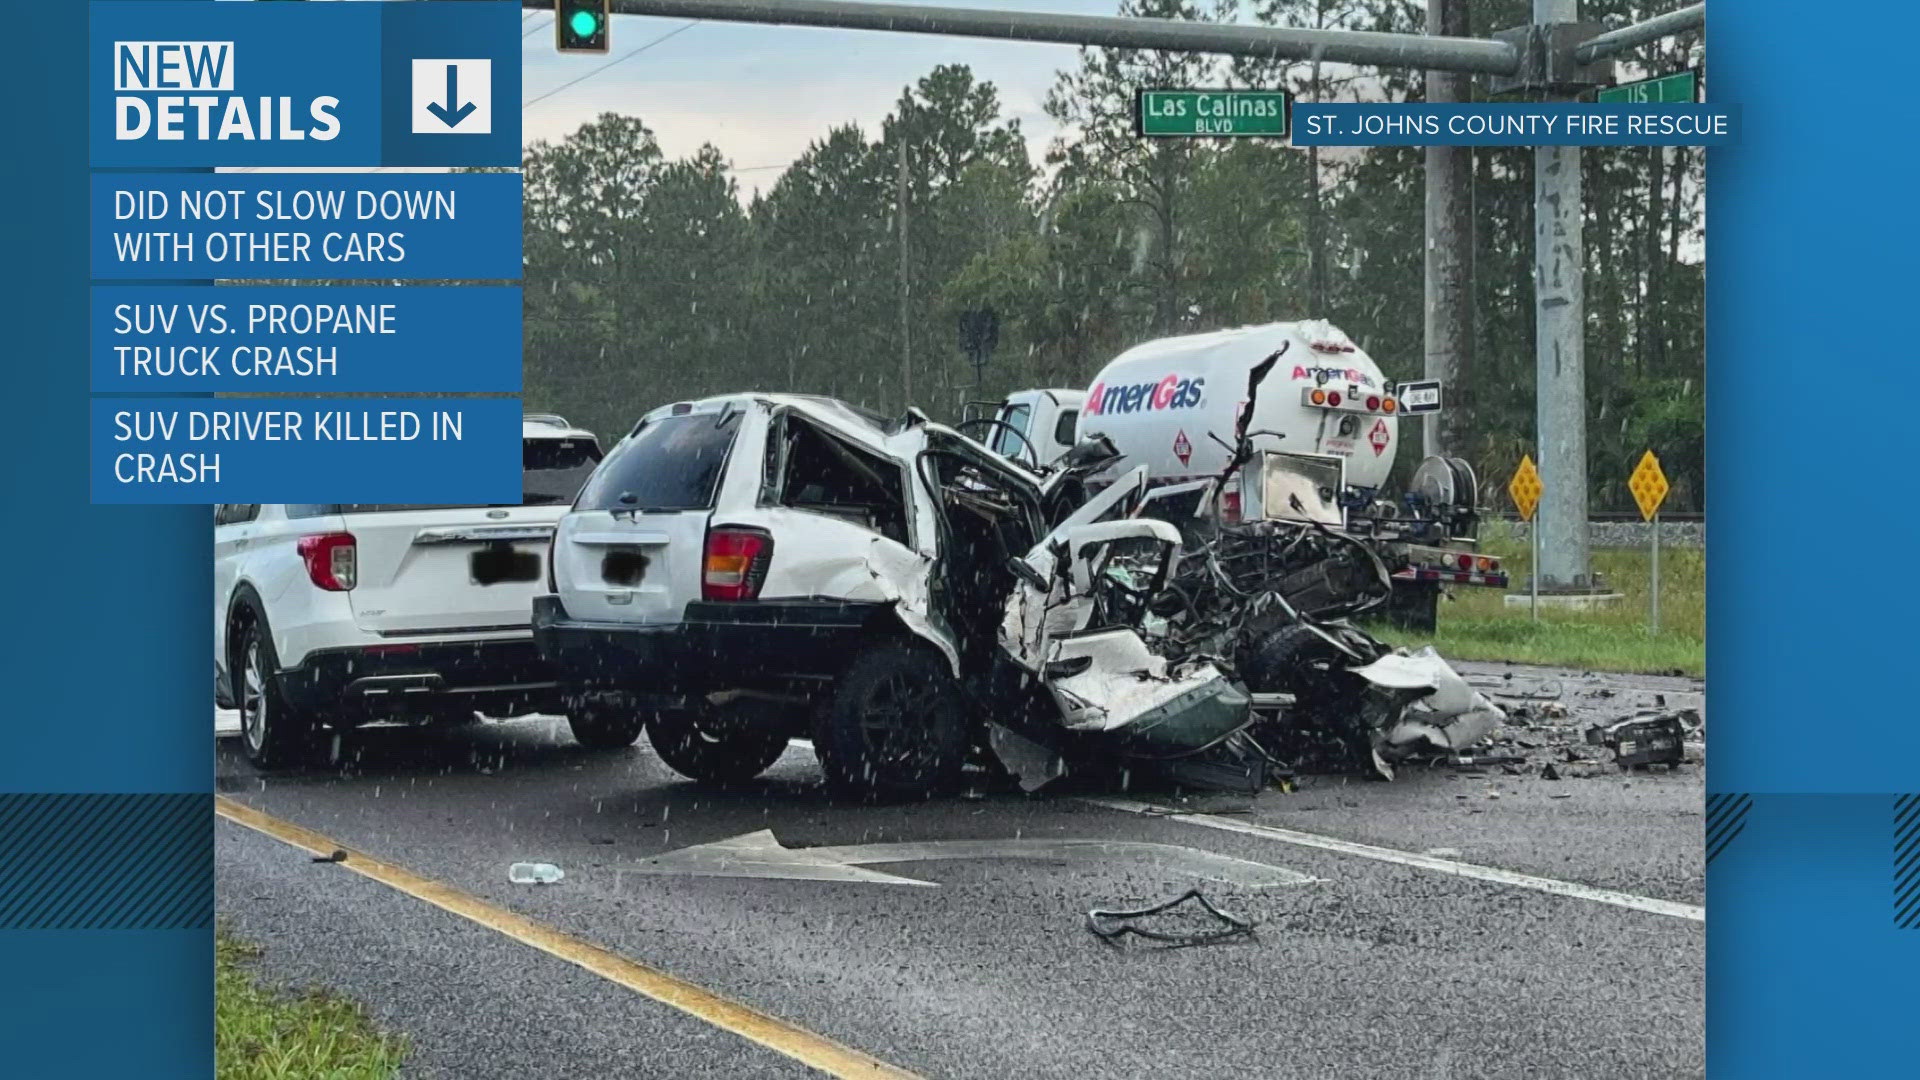 The Florida Highway Patrol said the driver of an SUV failed to slow down for the vehicle ahead and crashed into the back of it.